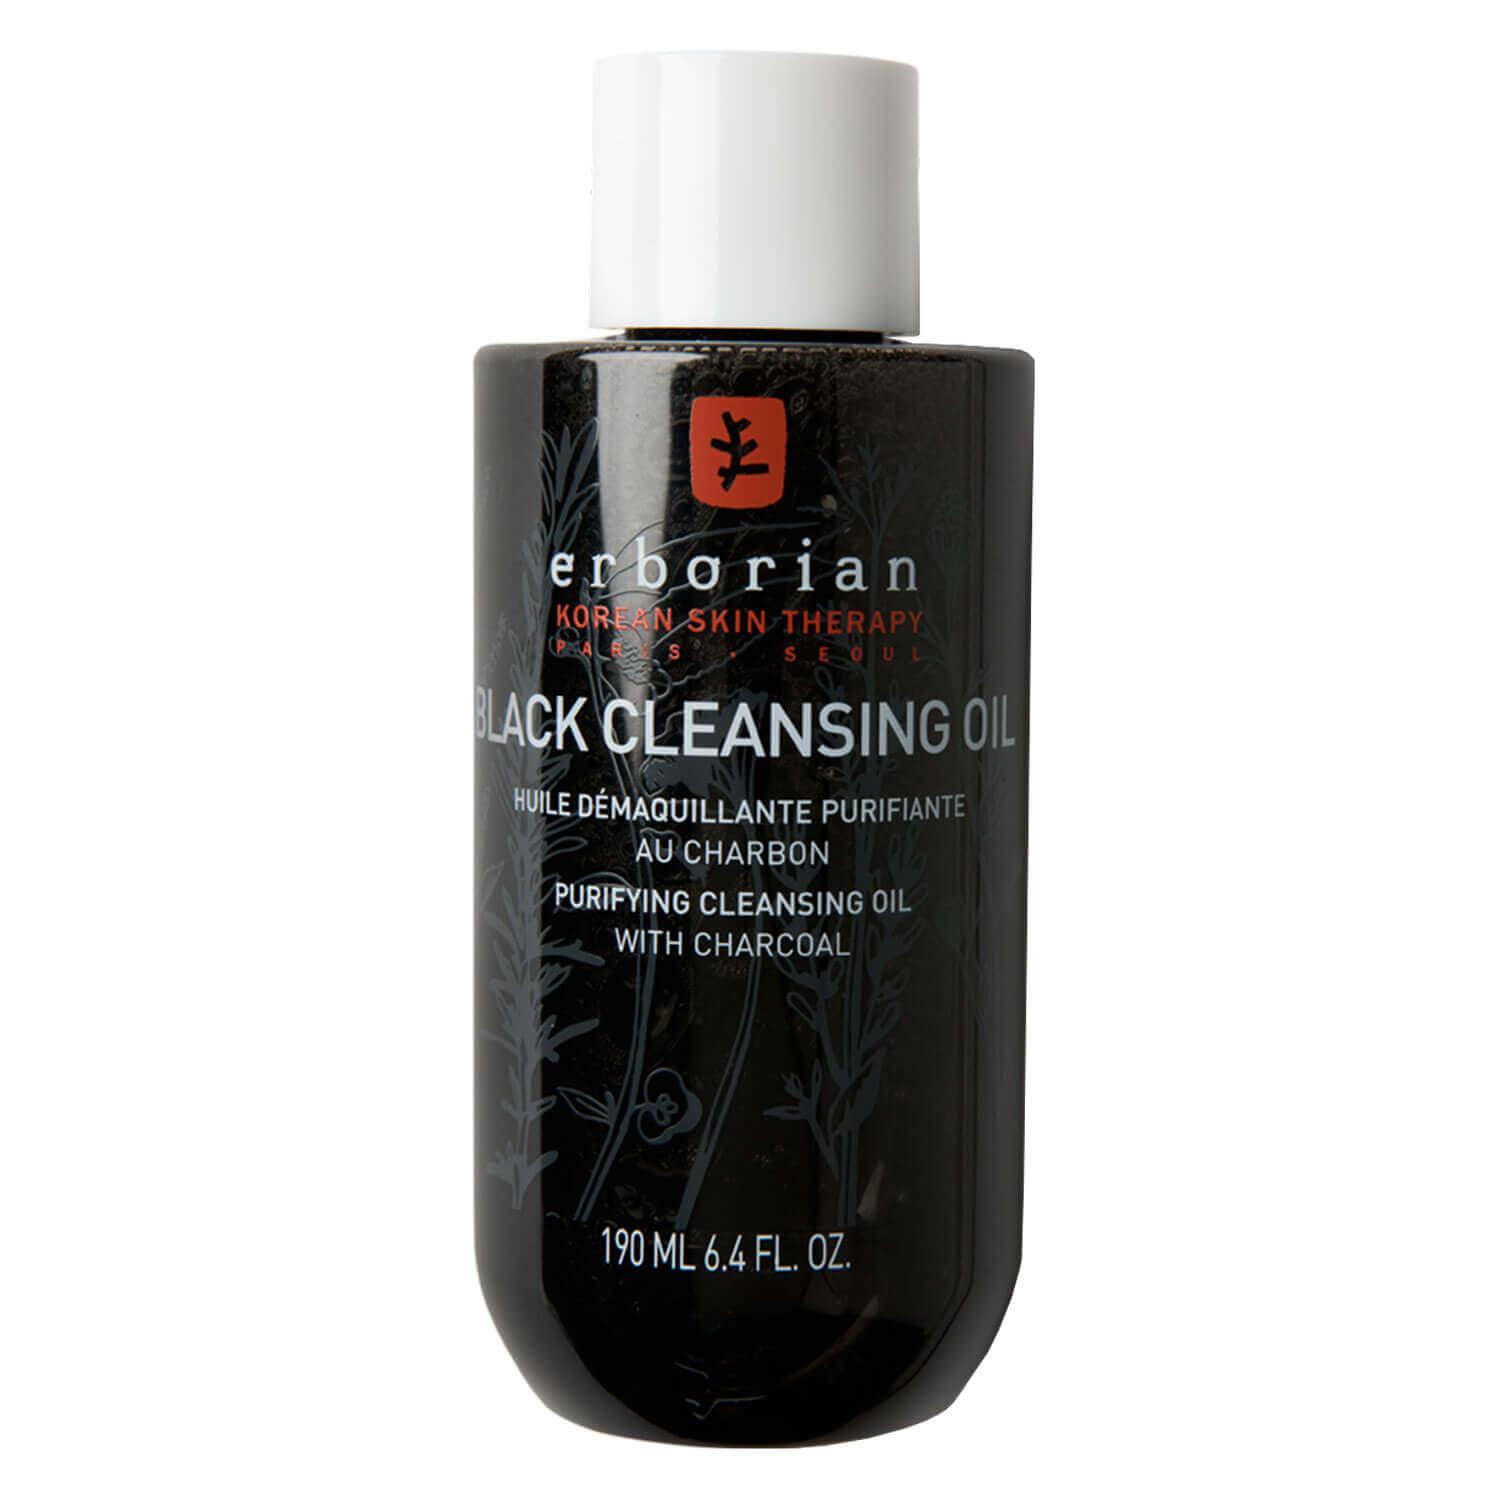 Charcoal - Black Cleansing Oil